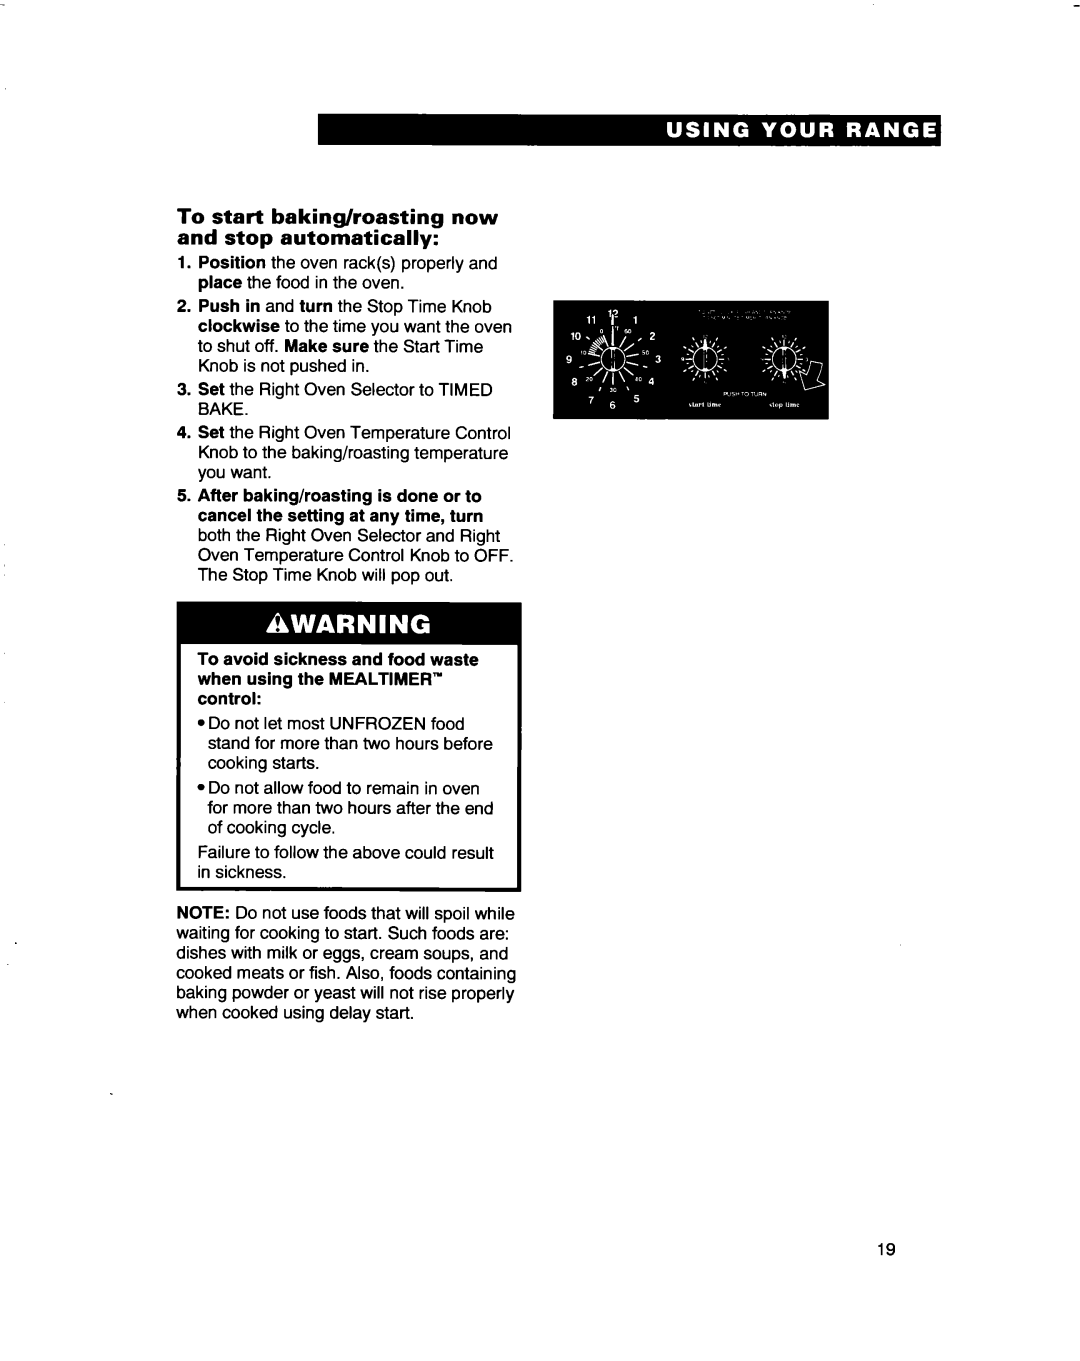 Whirlpool RF4700XB important safety instructions Set the Right Oven Selector to TIMED BAKE 